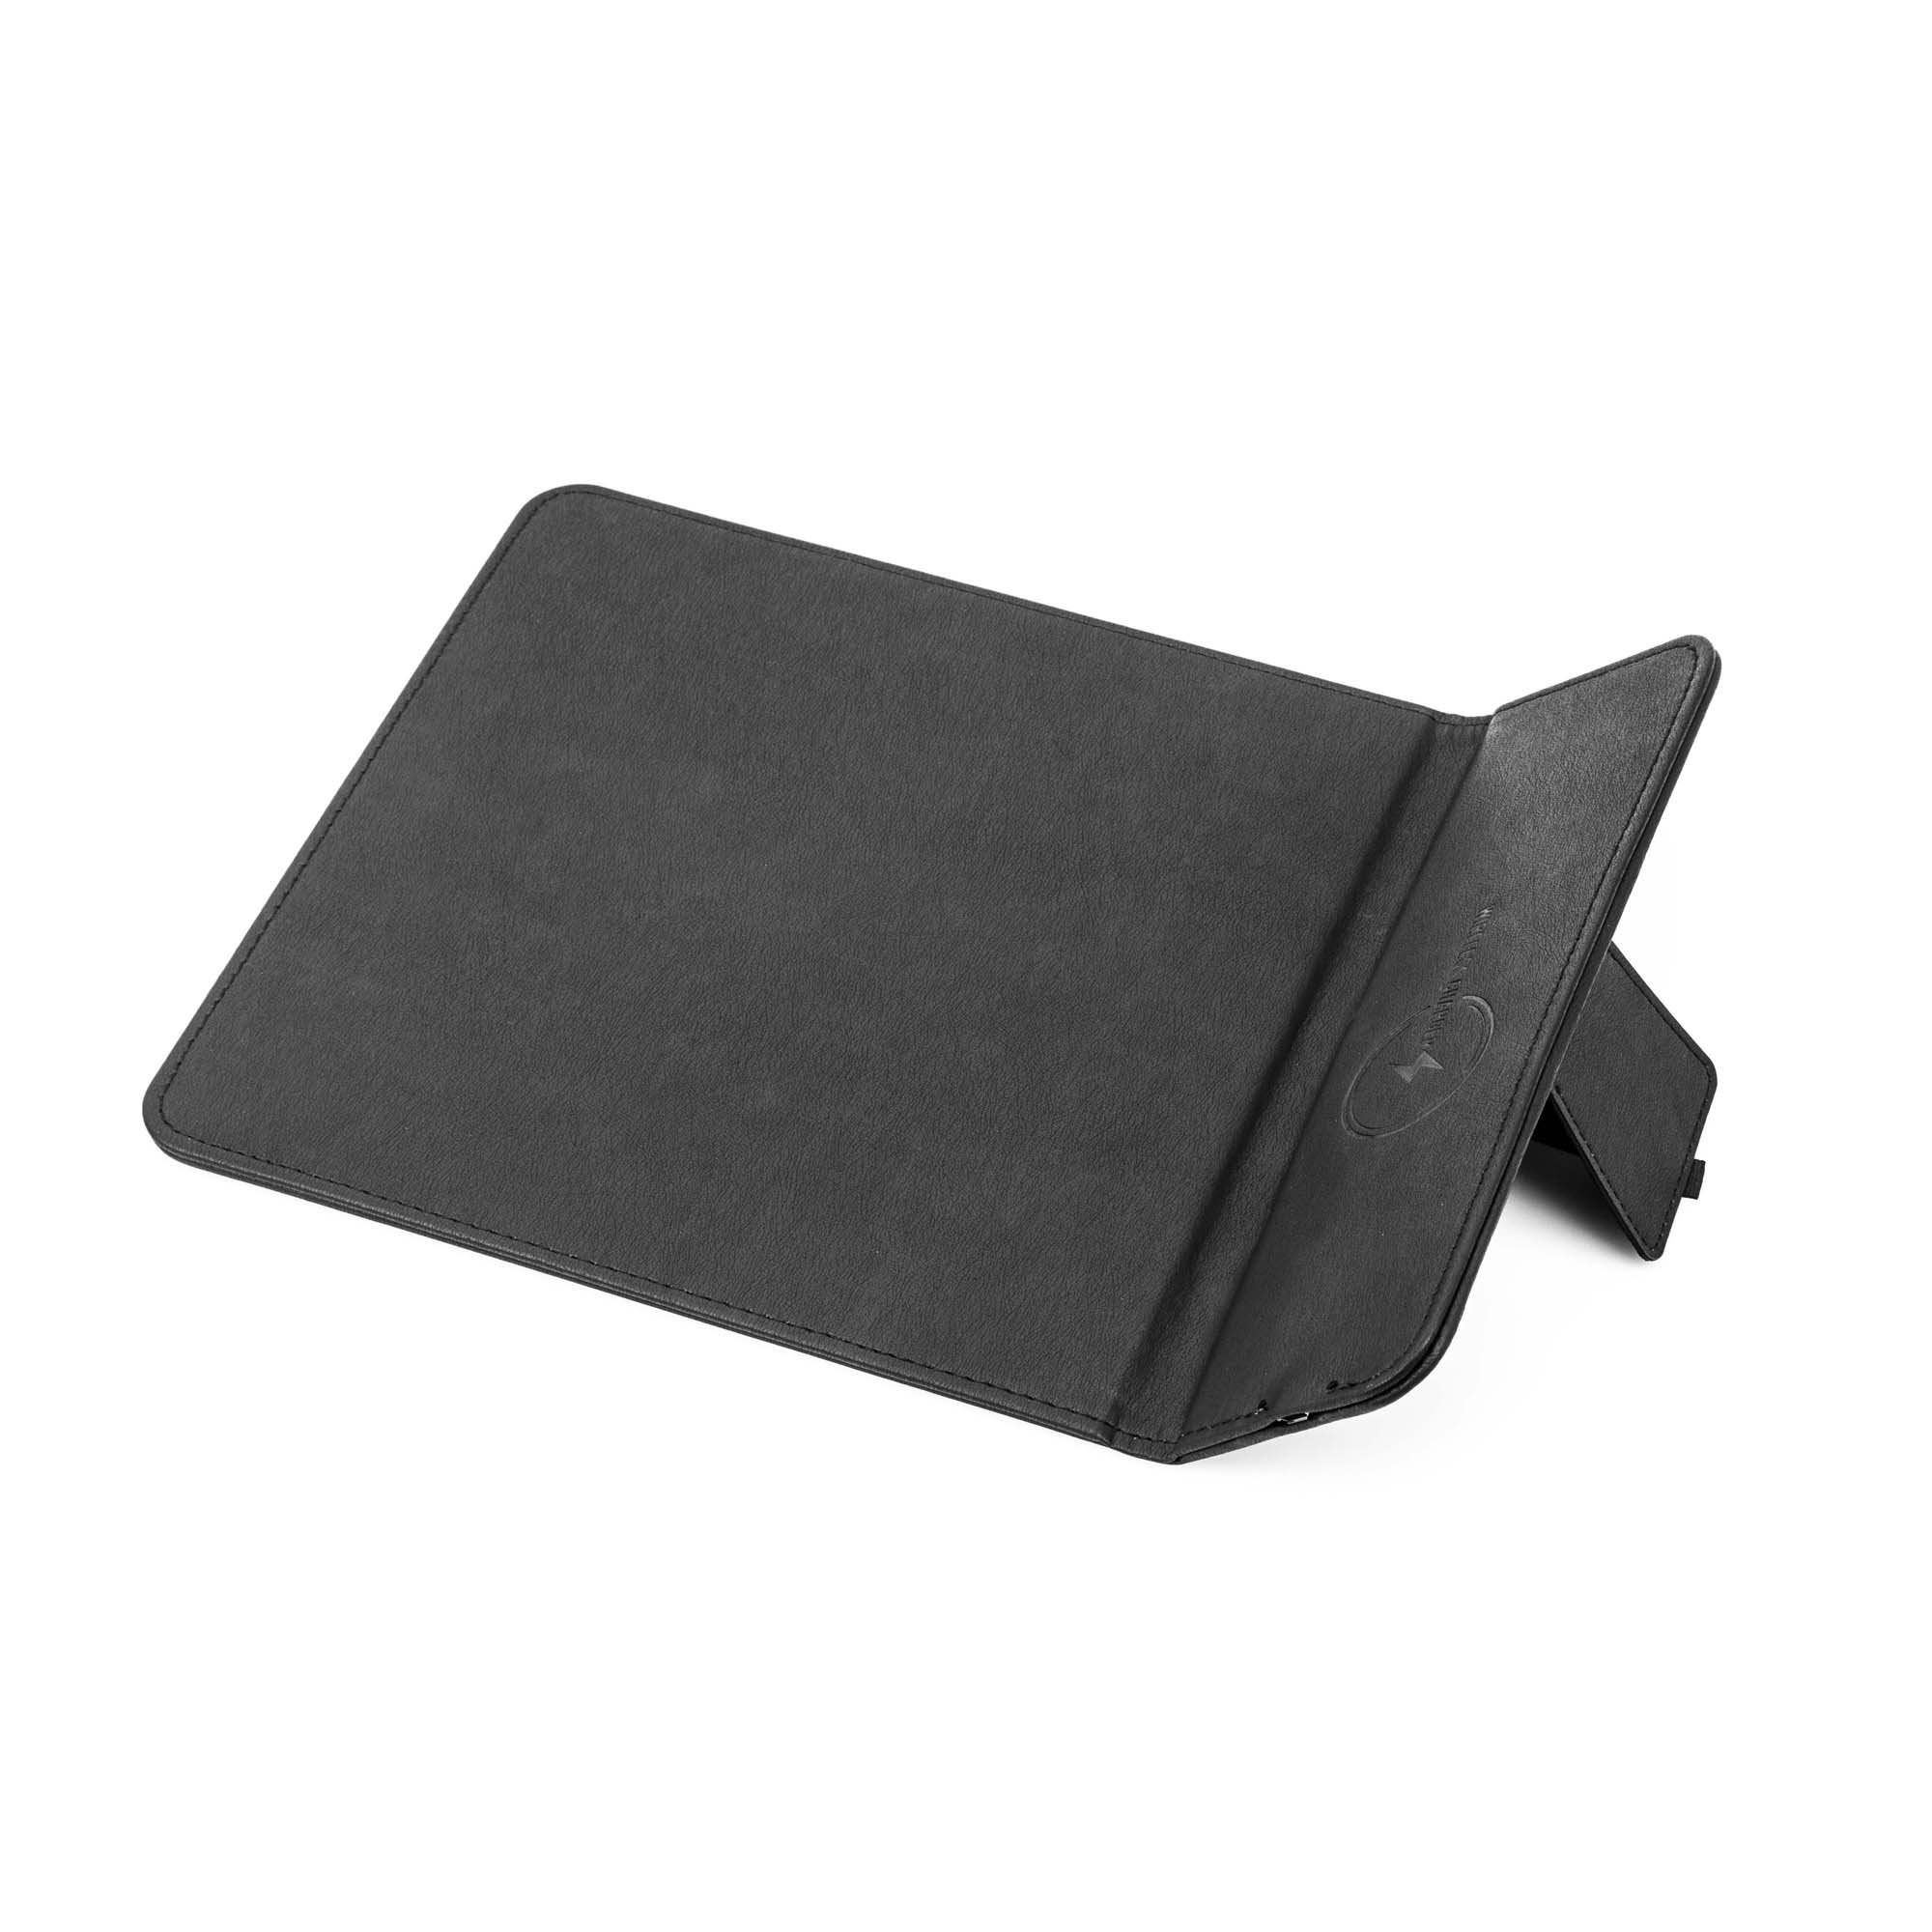 3 in 1 Fast Wireless Charger Mouse Pad With Phone Holder